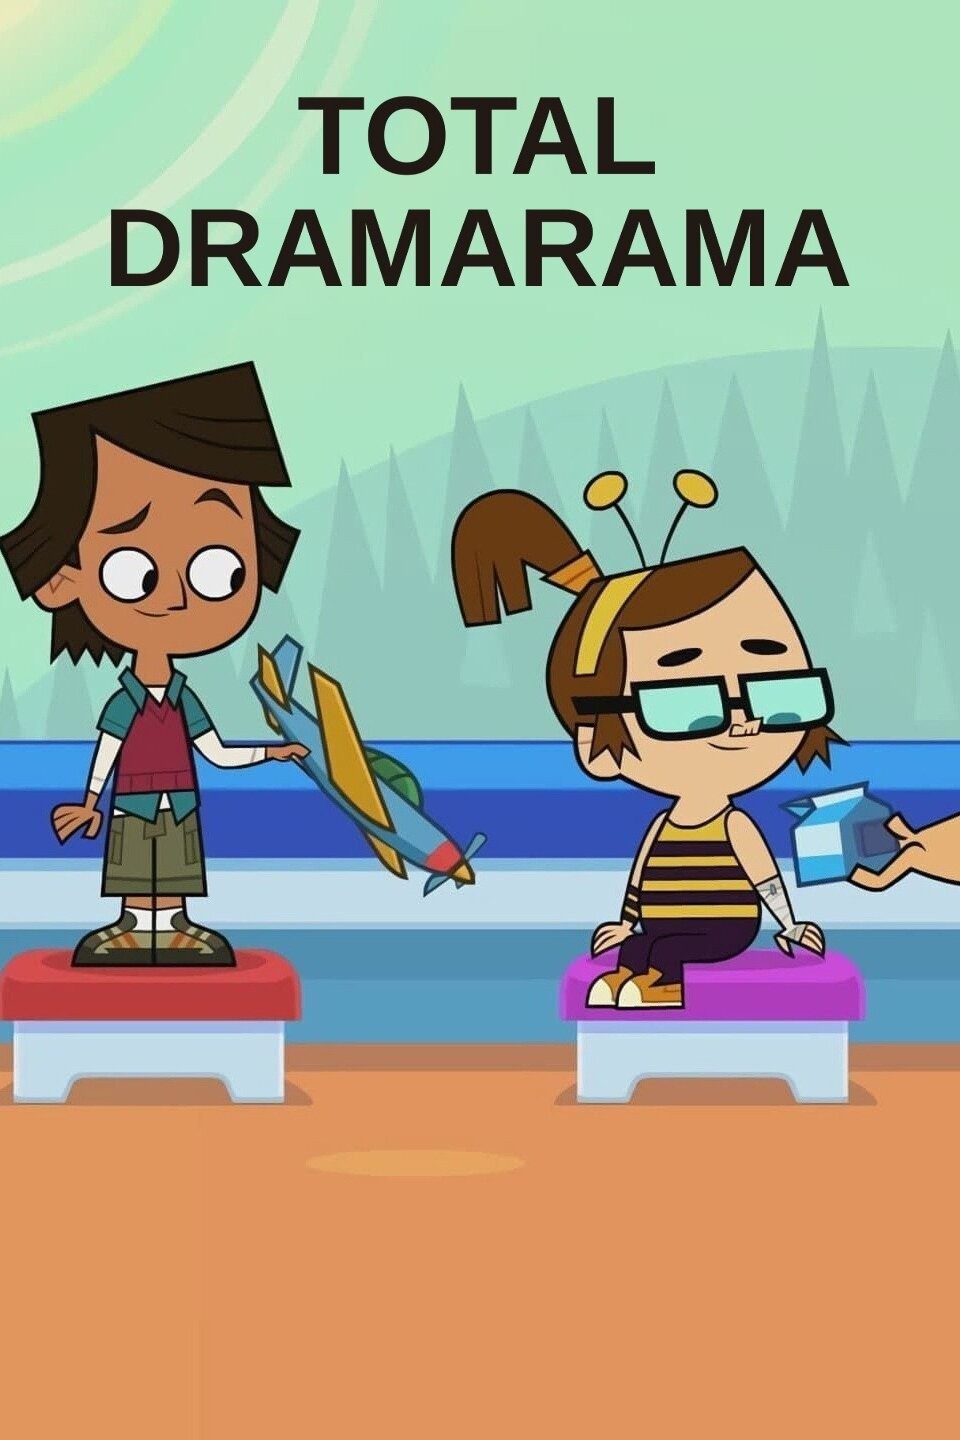 PREMIERE: A Very Special Special That's Quite Special, Total Dramarama